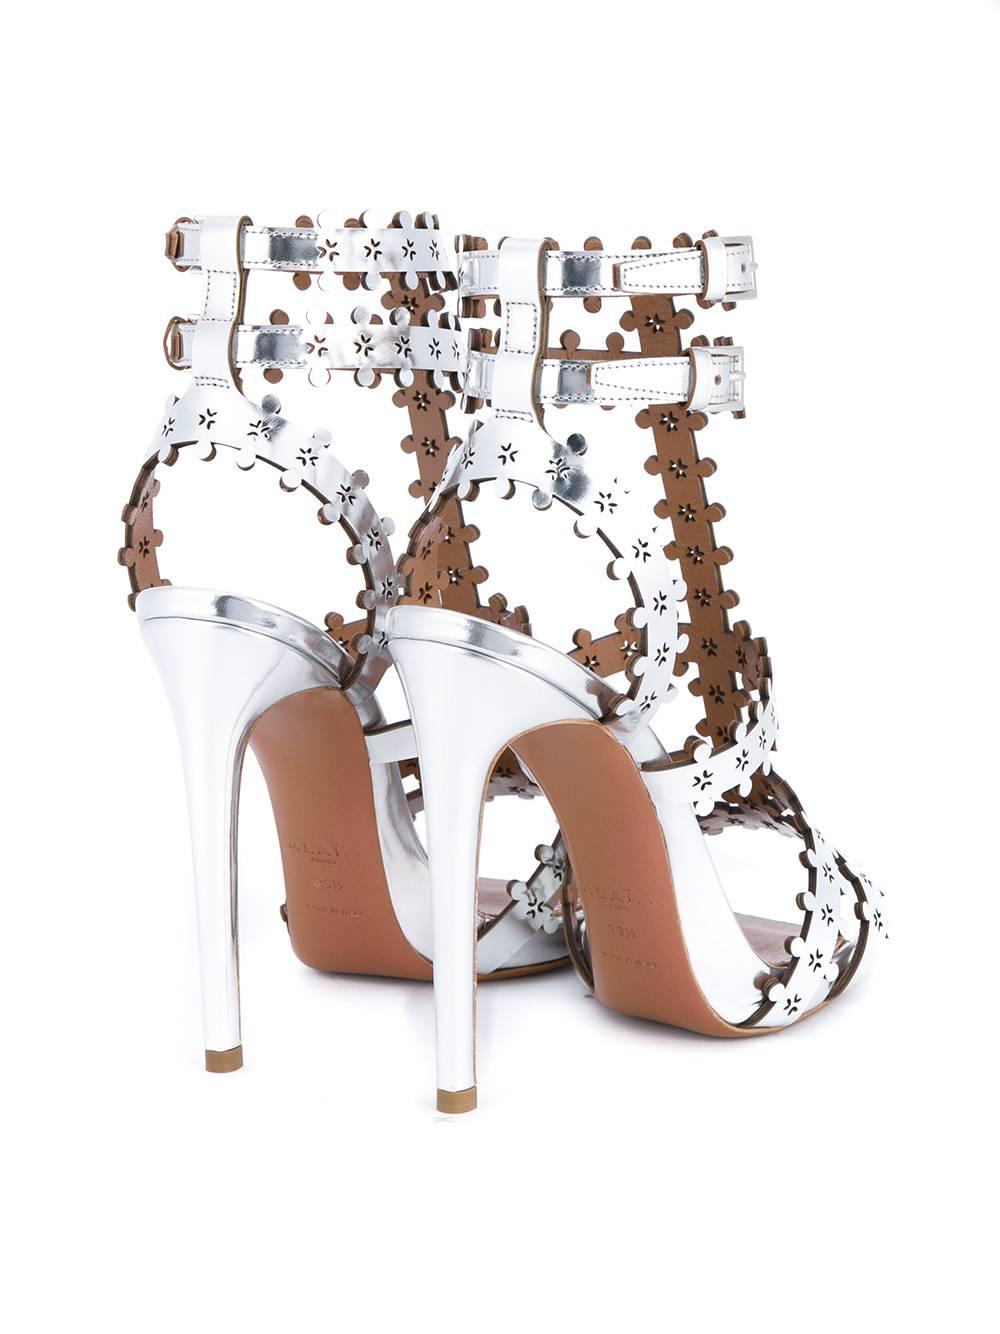 Alaia NEW Silver Cut Out Leather High Heels Stilettos Strappy Sandals in Box  1